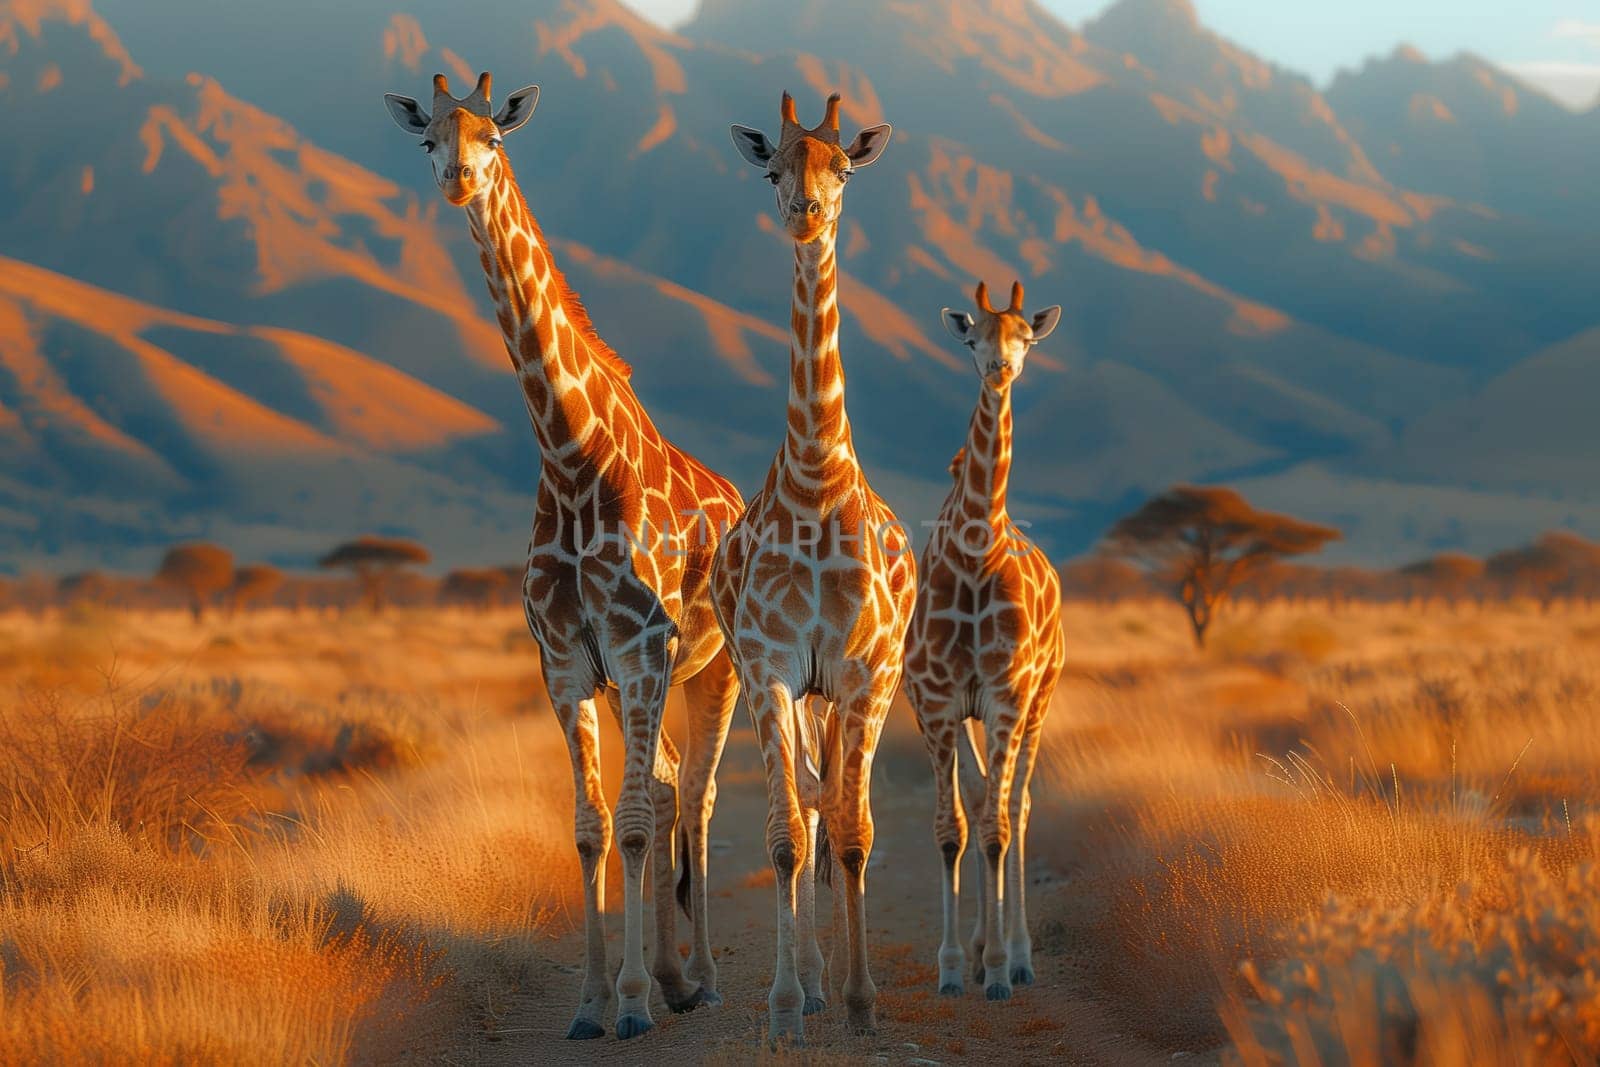 Three giraffes stand in a grassland with mountains in the background by richwolf